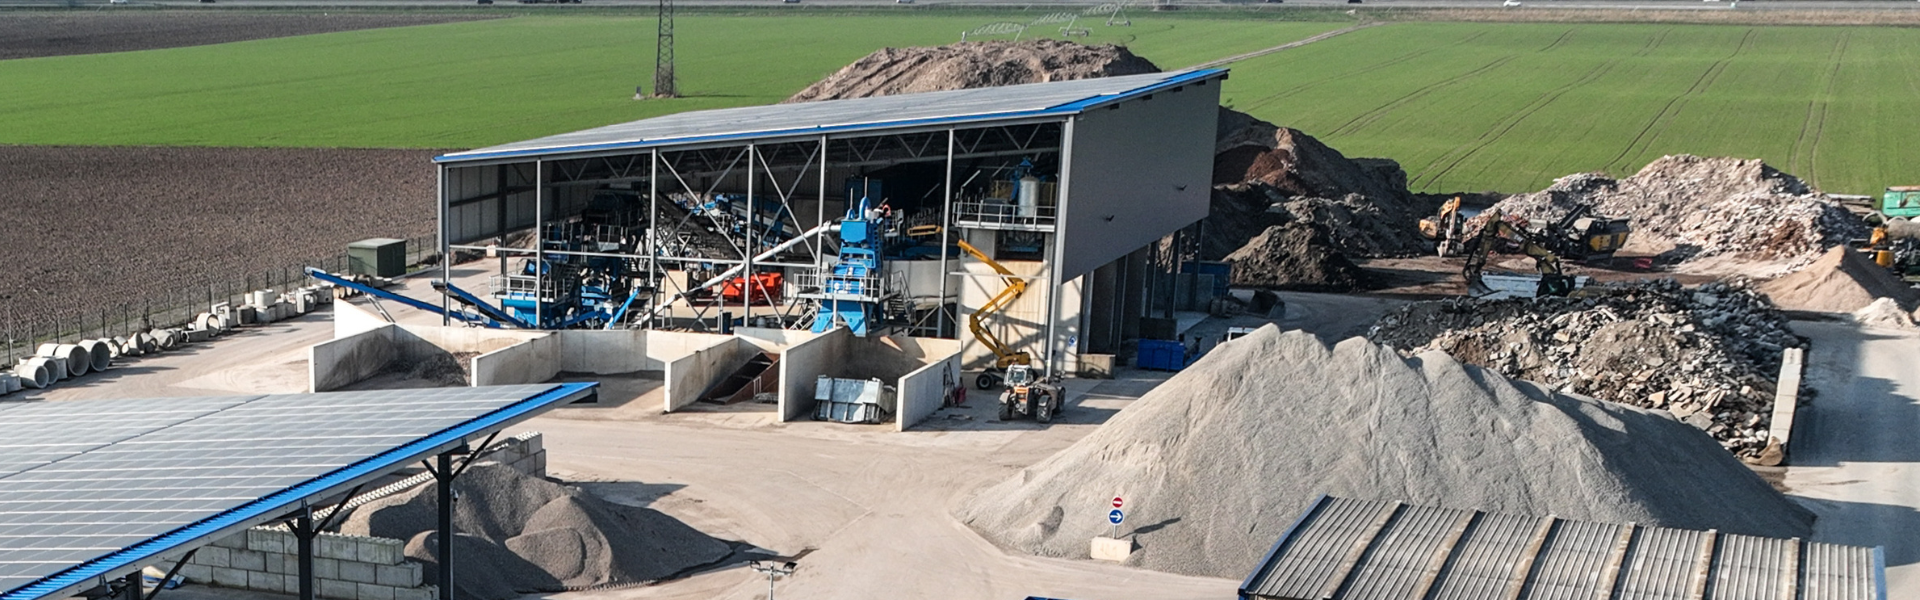 VVK Recyclage 80tph C&D Waste Recycling Plant